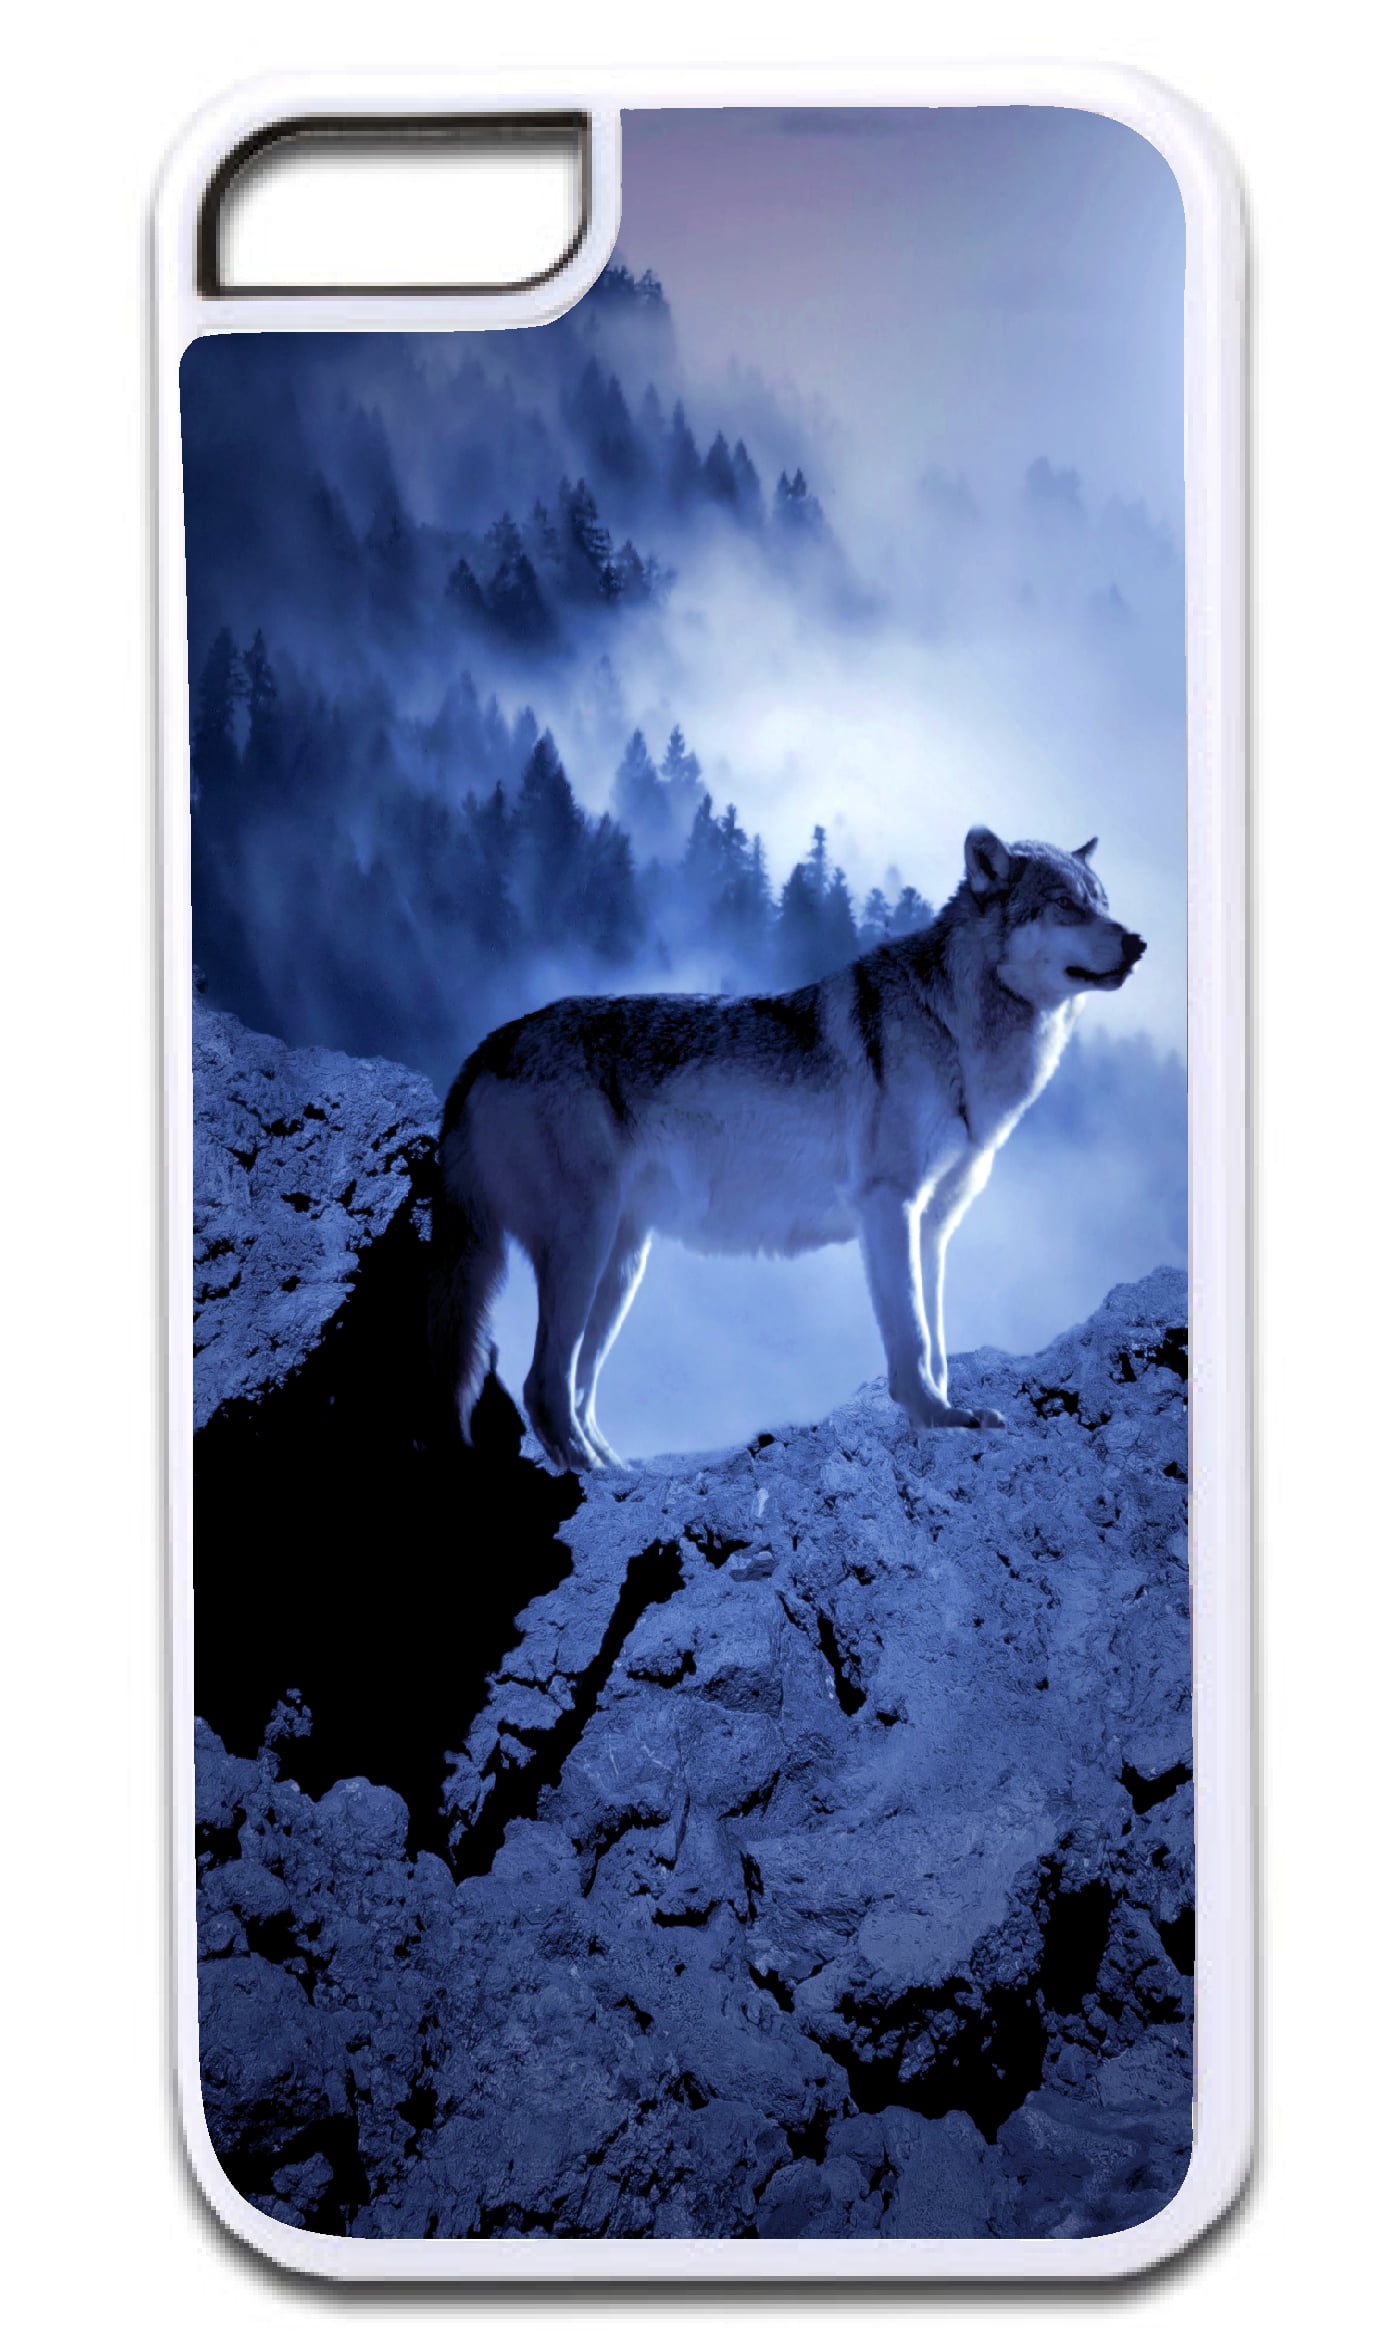 Wolf on a Mountaintop Design White Rubber Case for the Apple iPhone 6 / iPhone 6s - iPhone 6 Accessories - iPhone 6s Accessories